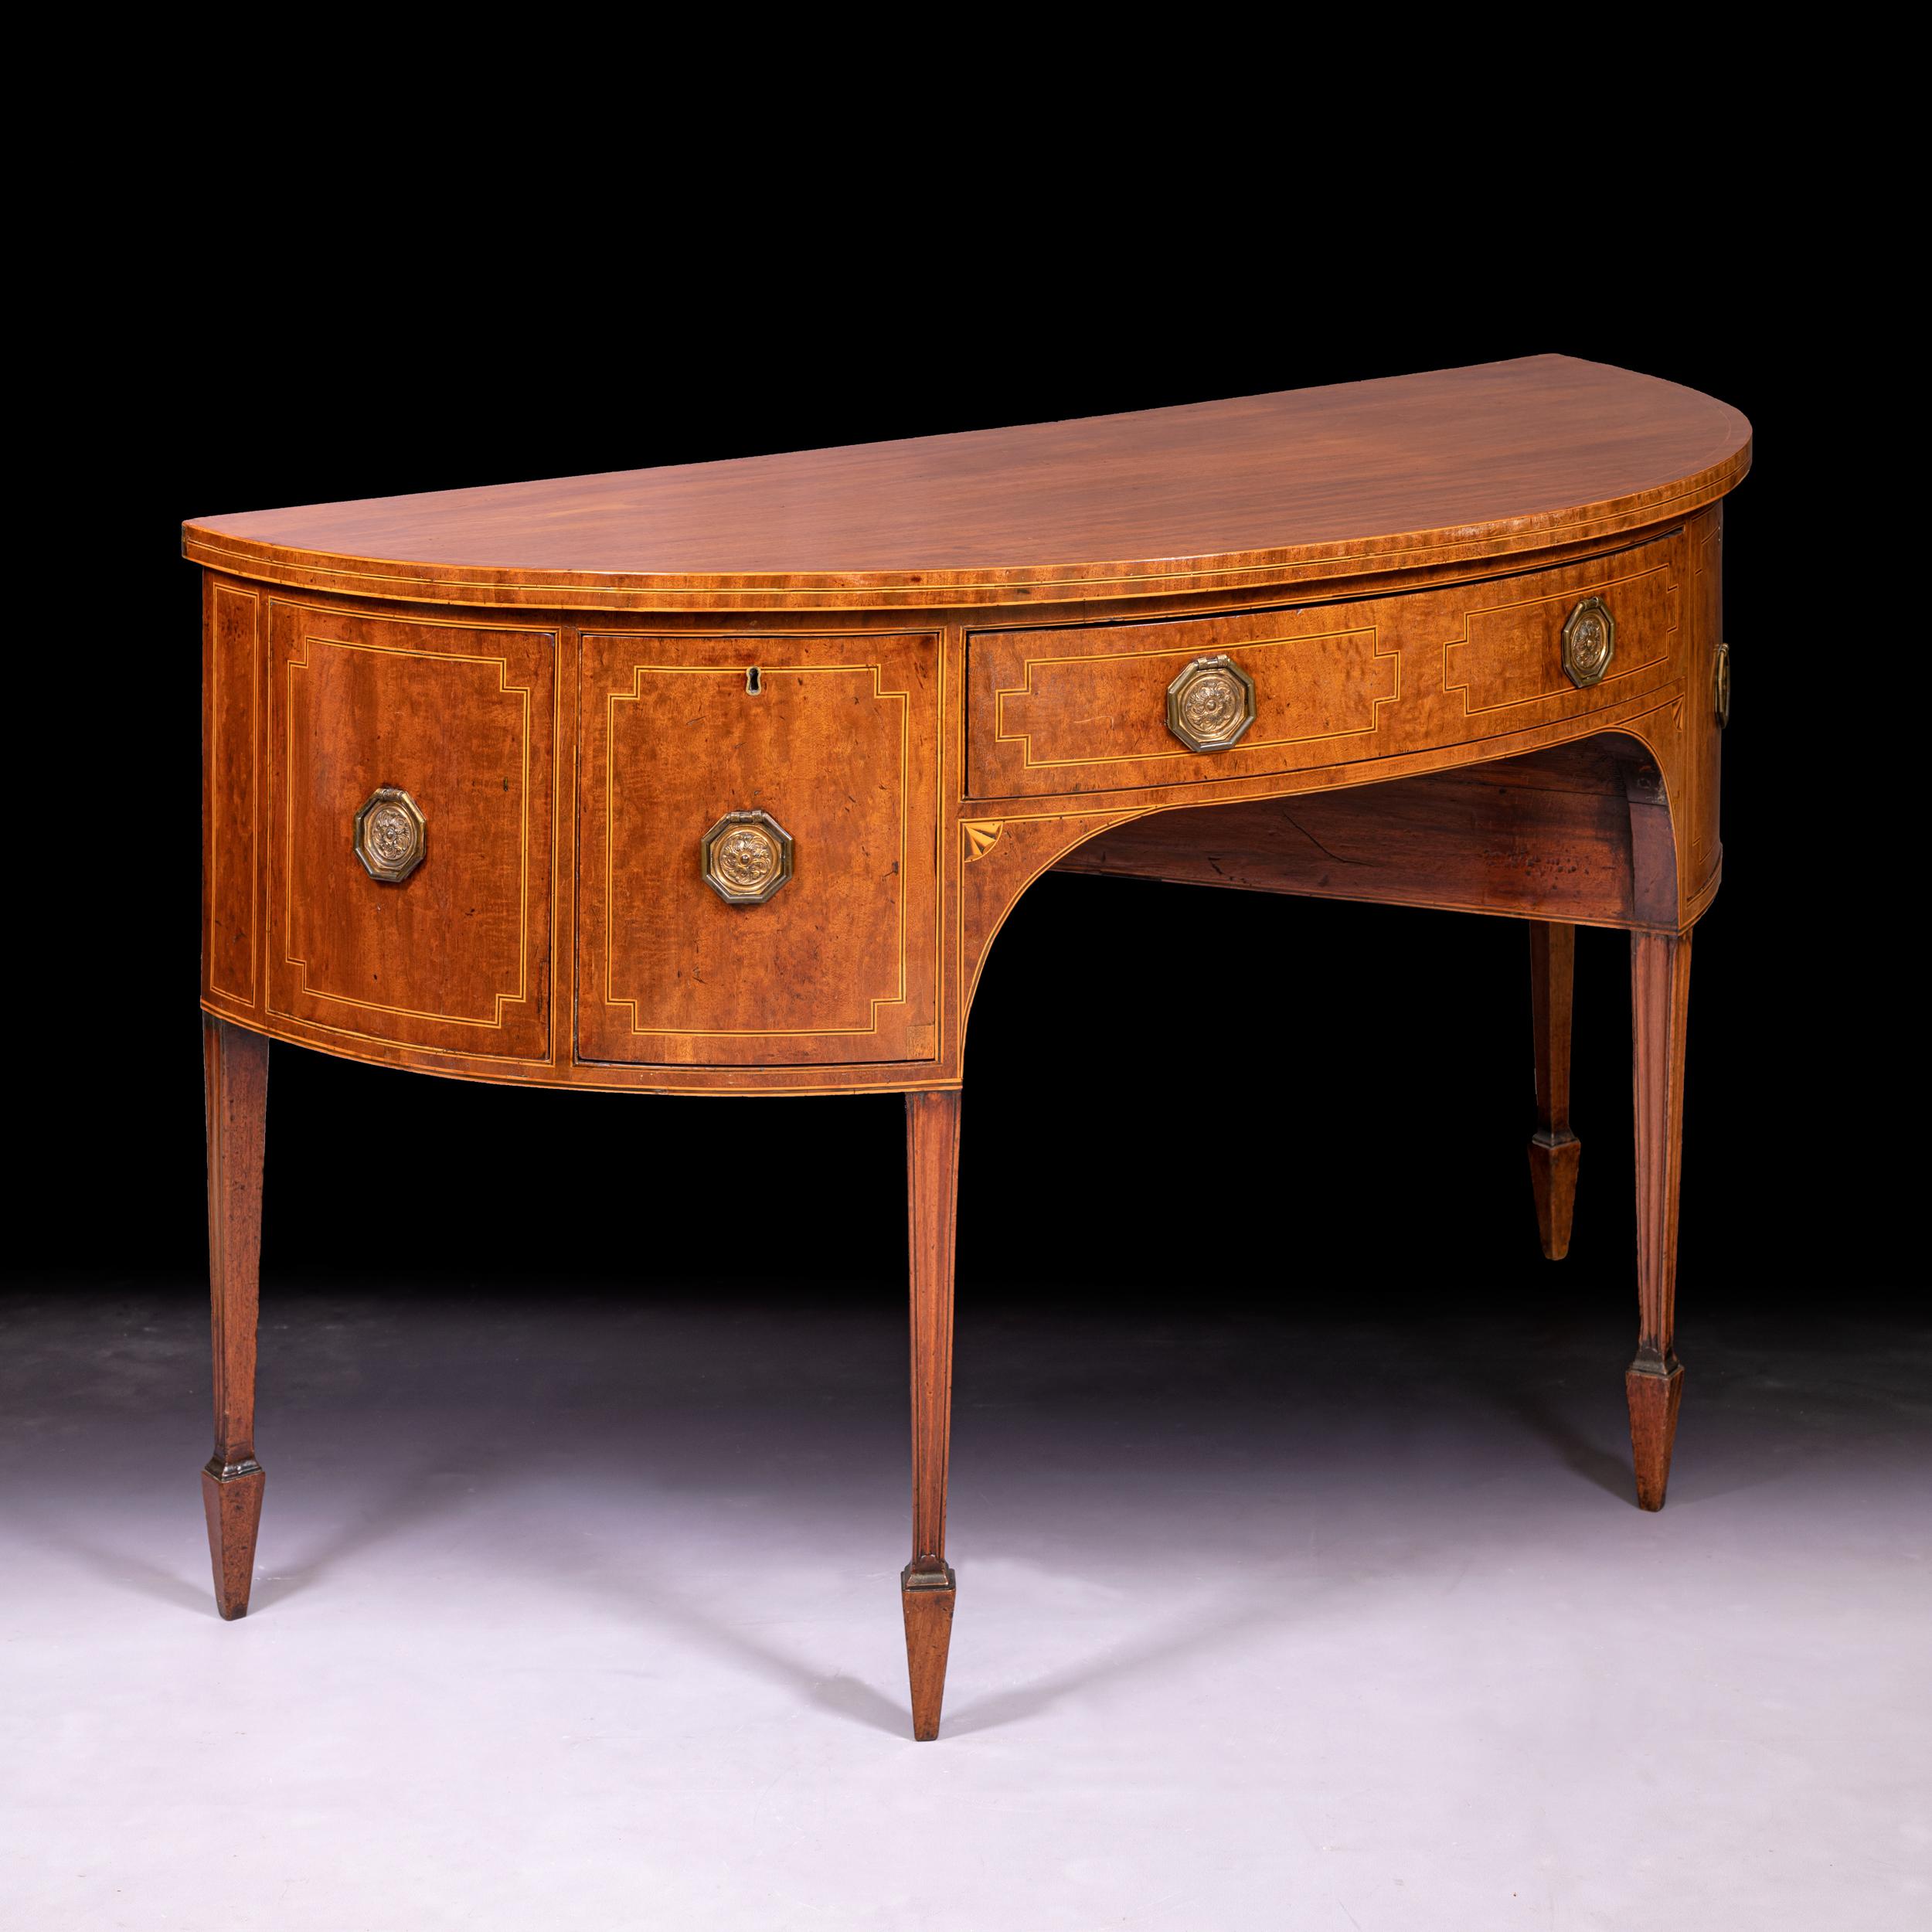 Late 18th Century English Georgian Mahogany Bow Fronted Sideboard For Sale 1